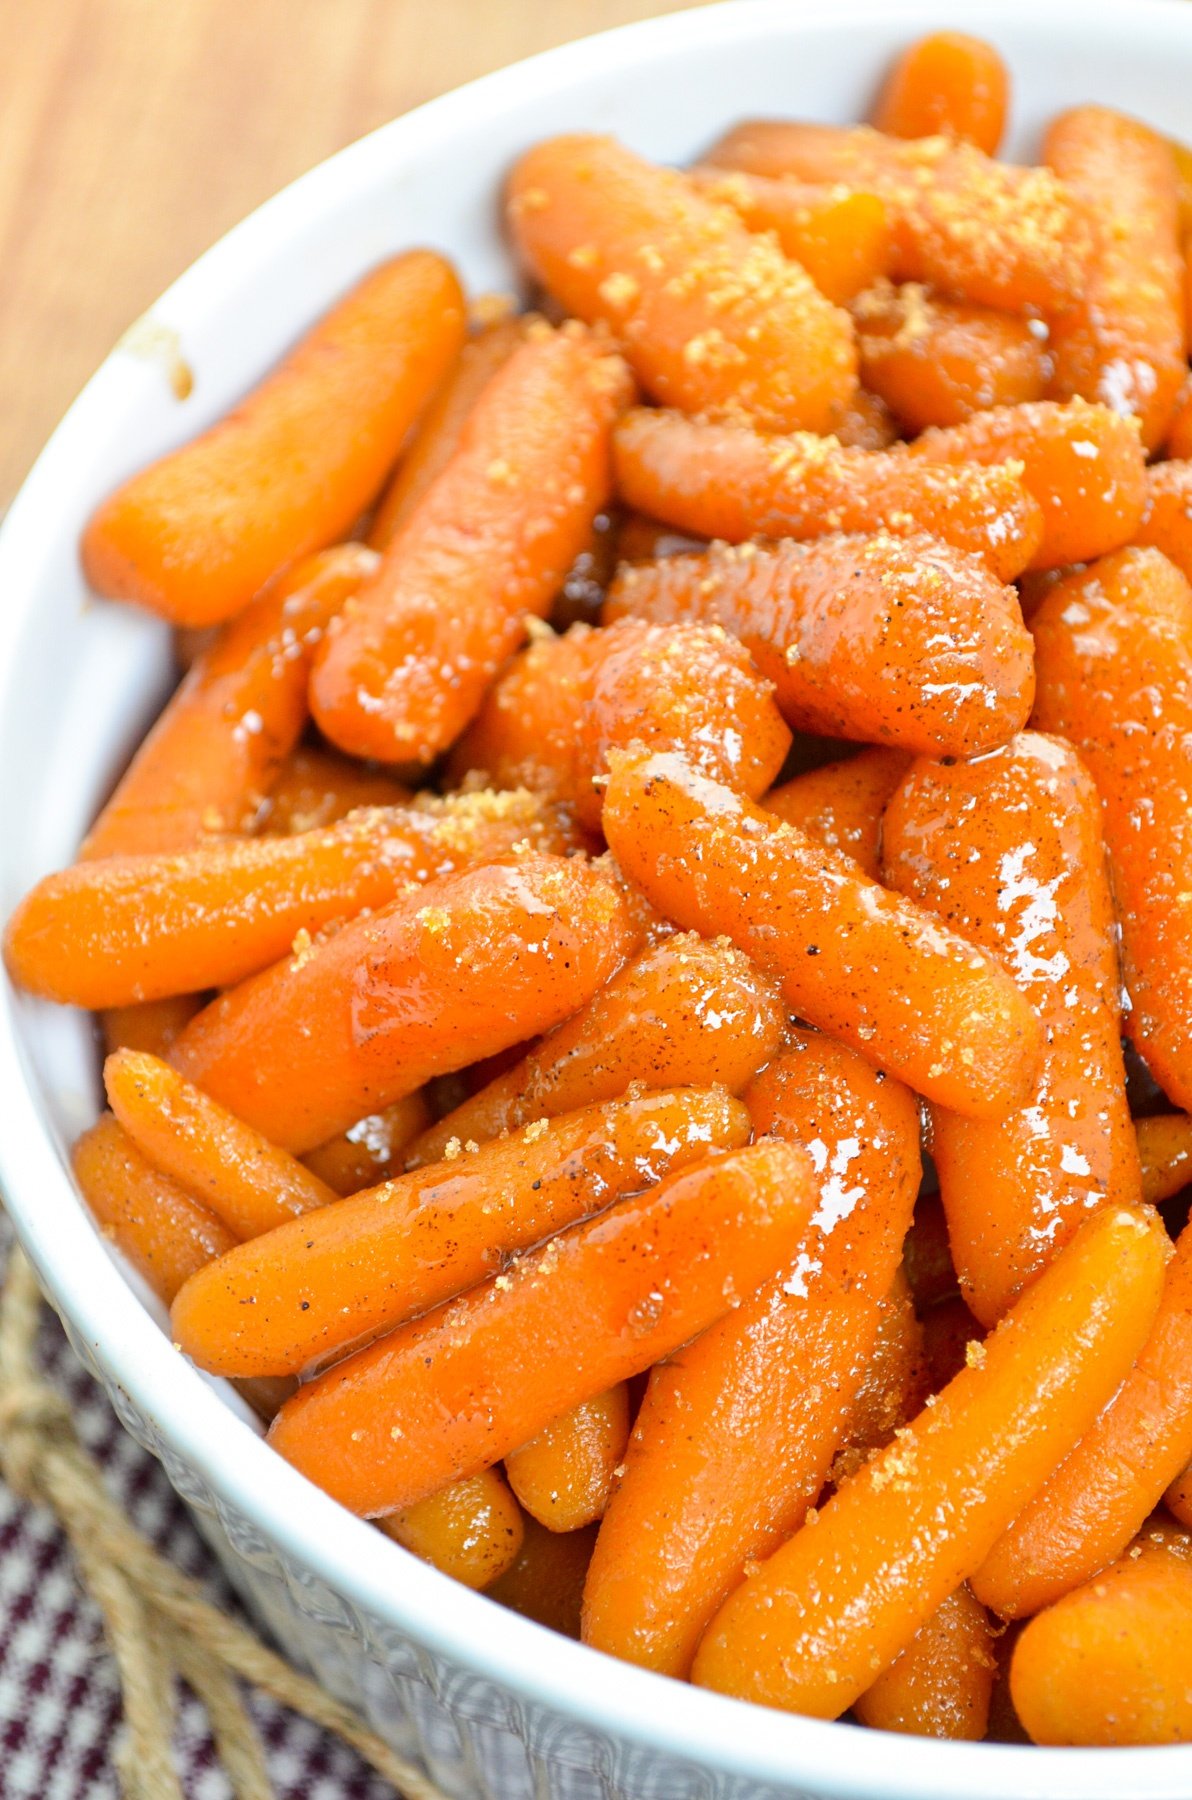 A serving dish full of maple glazed carrots.